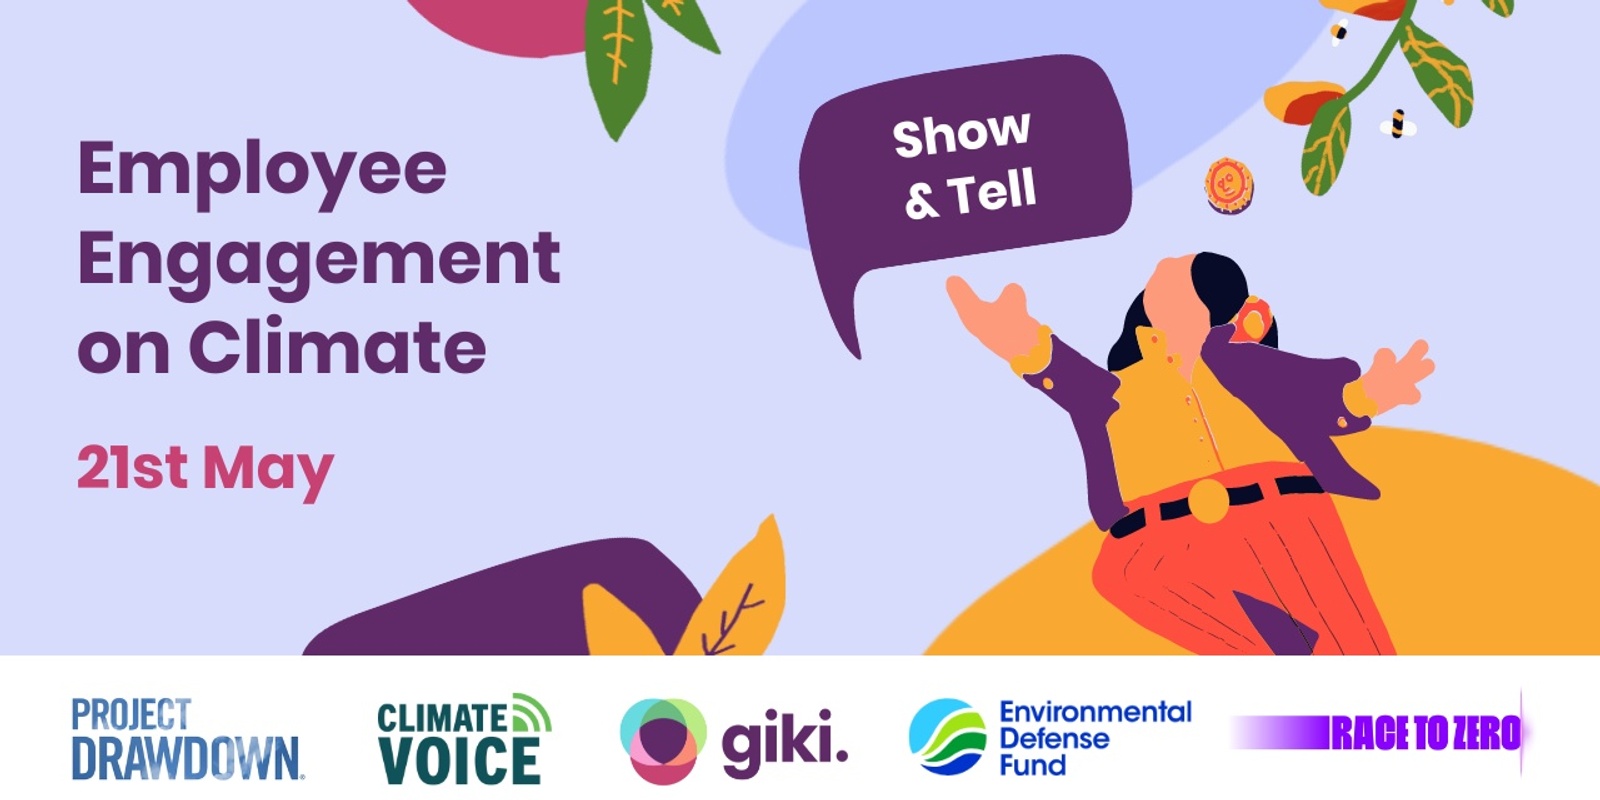 Banner image for Employee Engagement on Climate - Show & Tell